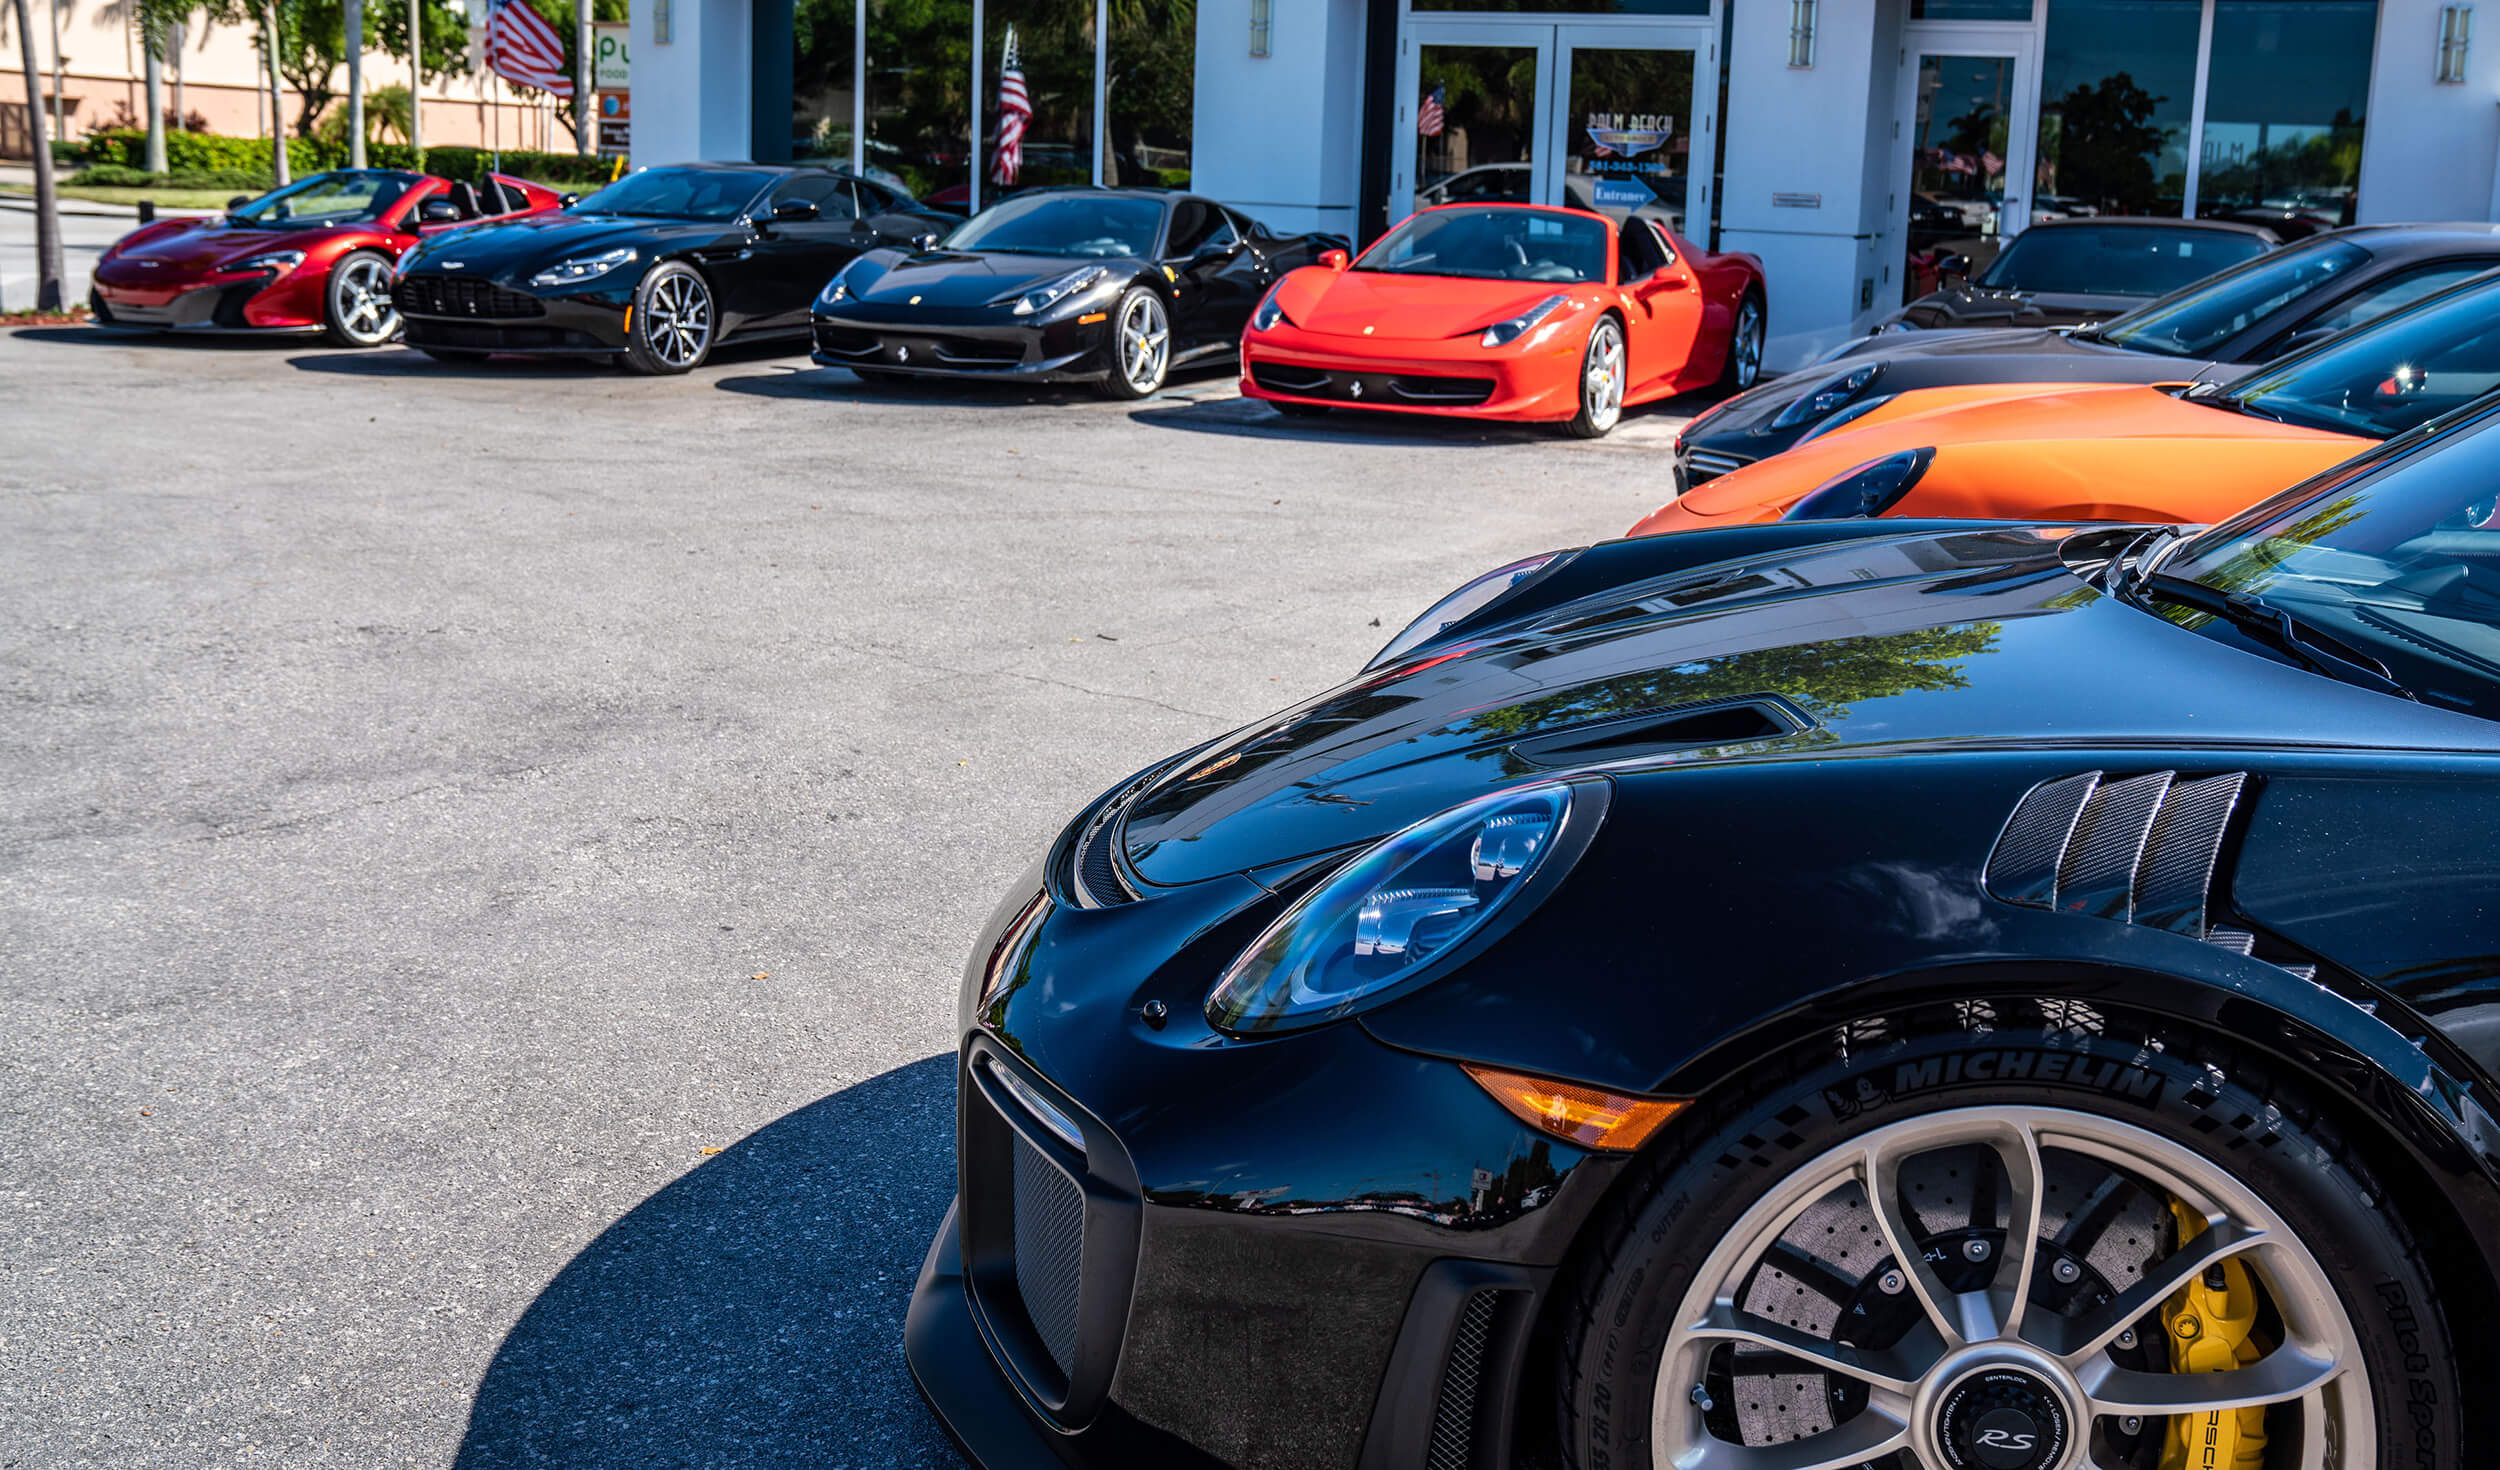 Exterior image of Palm Beach Auto Group dealership: front of store with exotic cars.